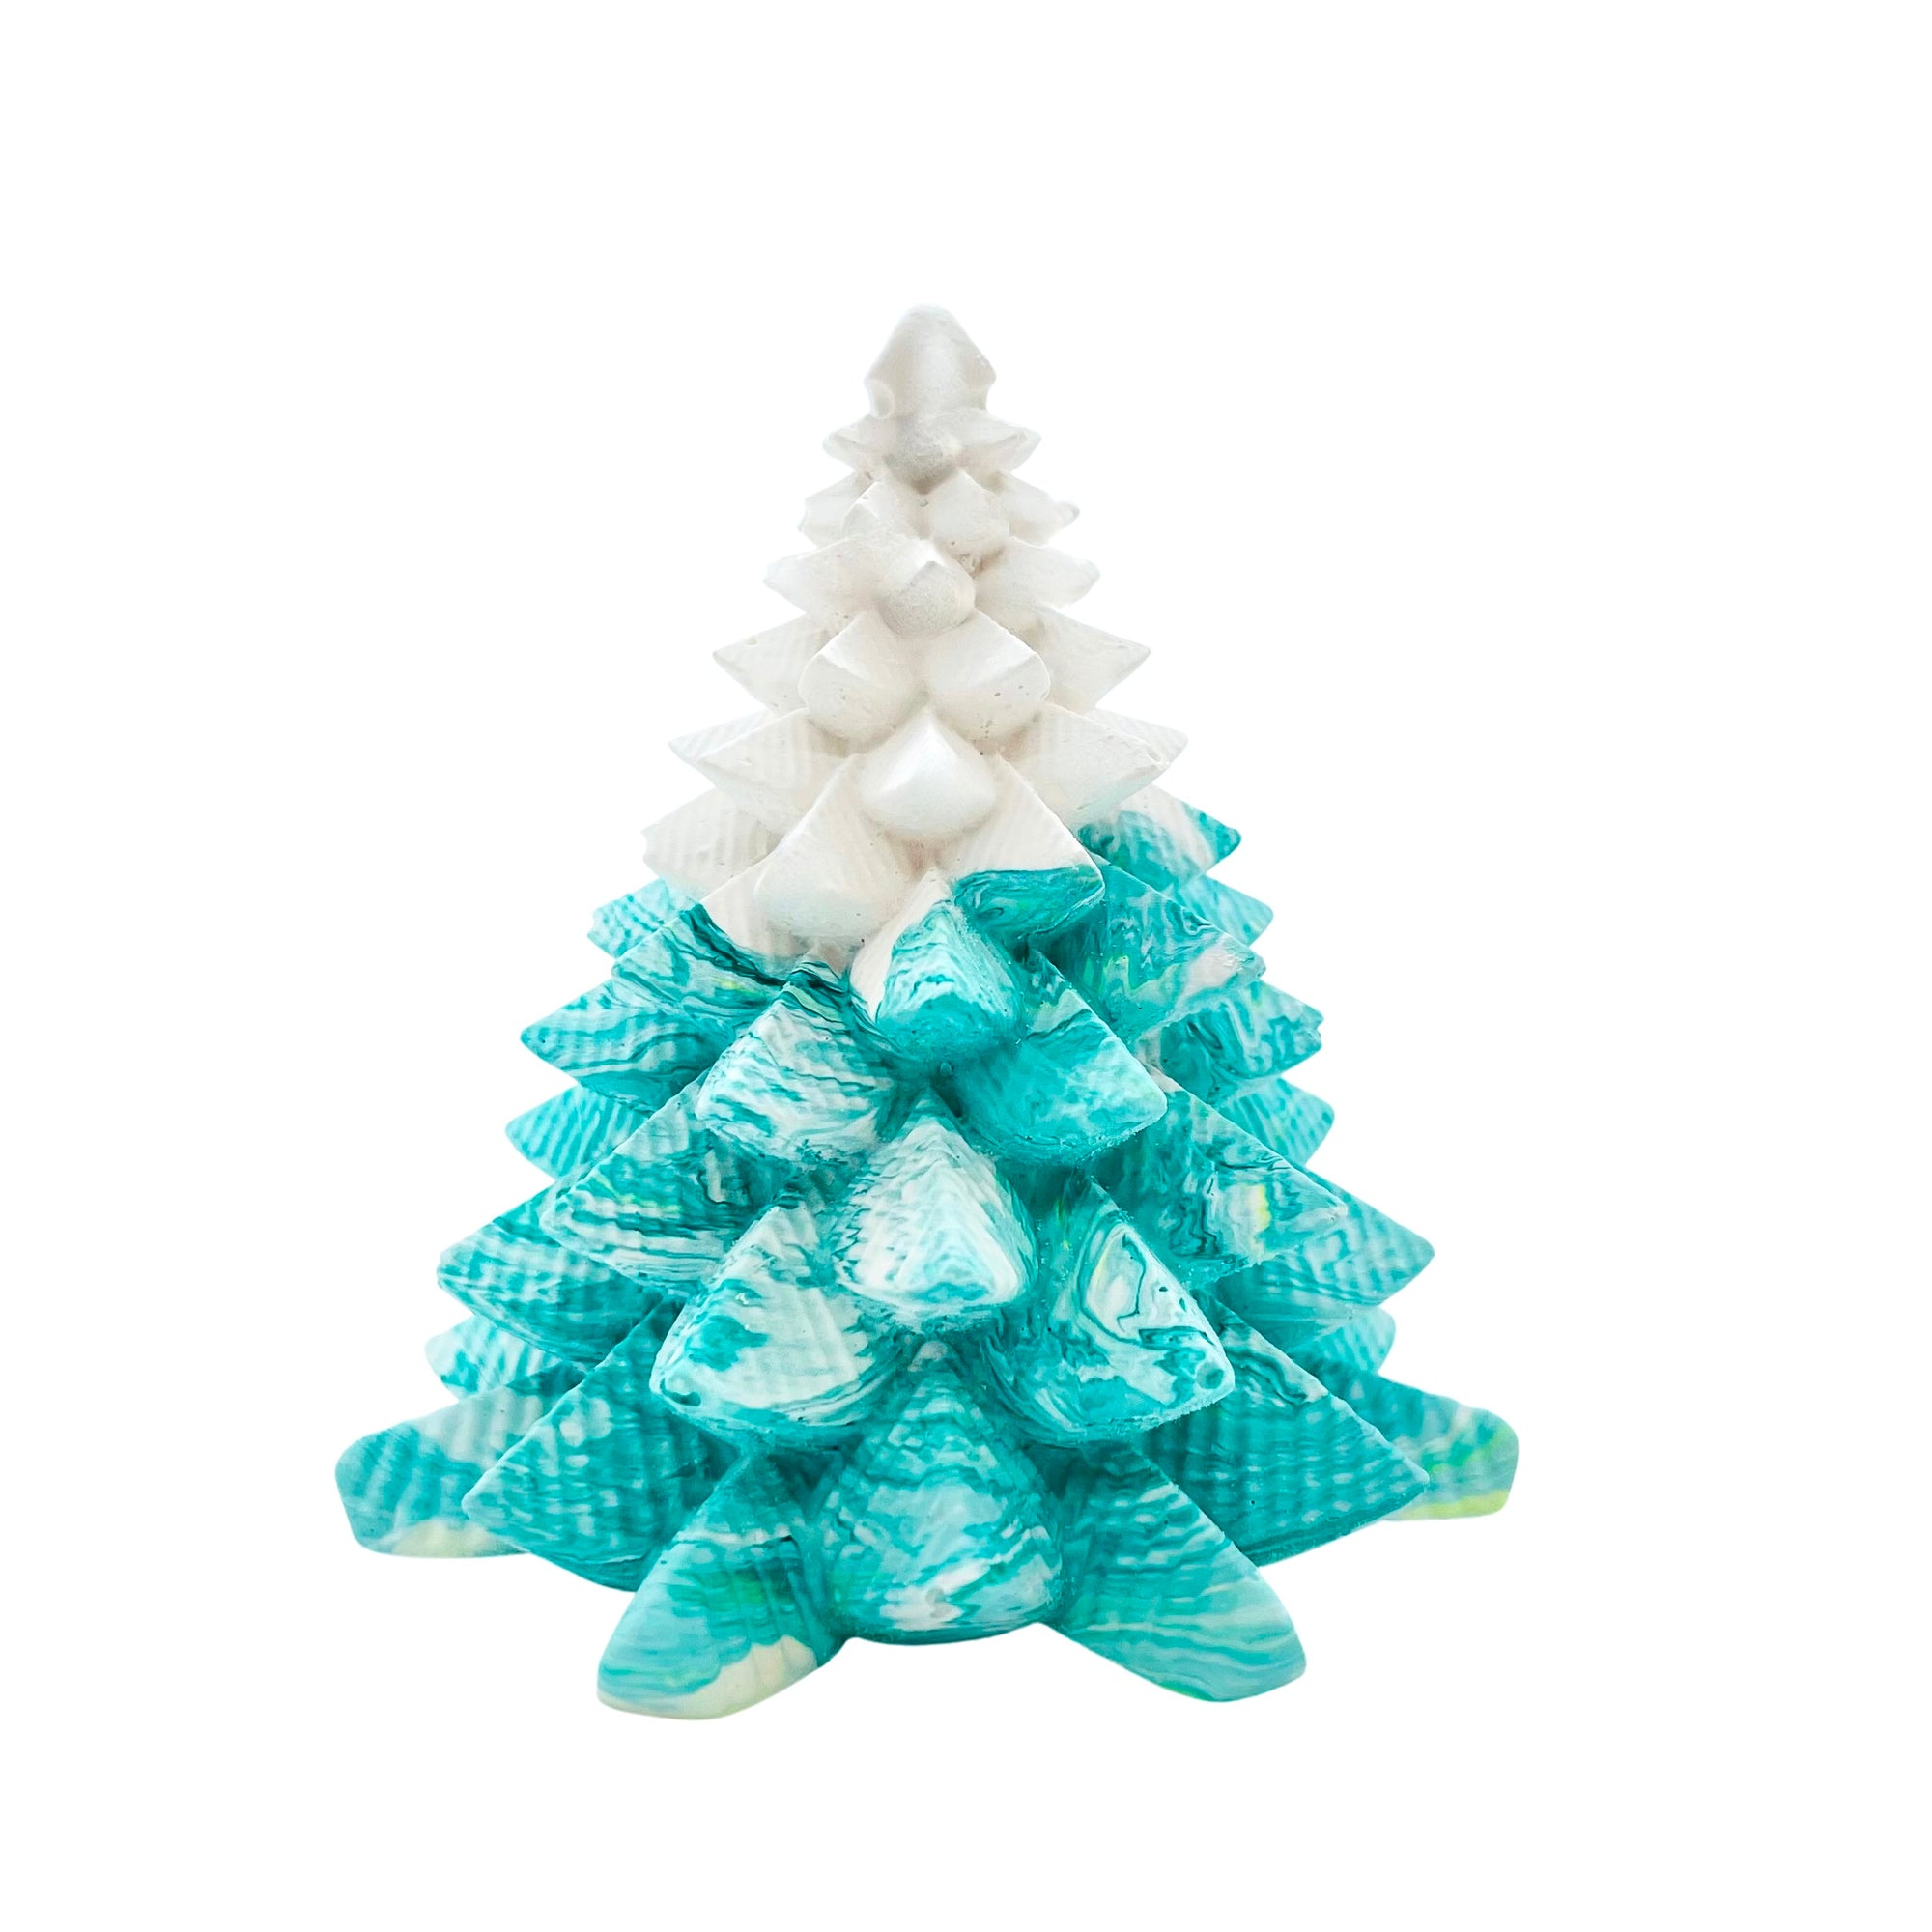 A small Jesmonite Christmas tree measuring 8.5cm tall and 7.5cm wide marbled with teal and white pigment.